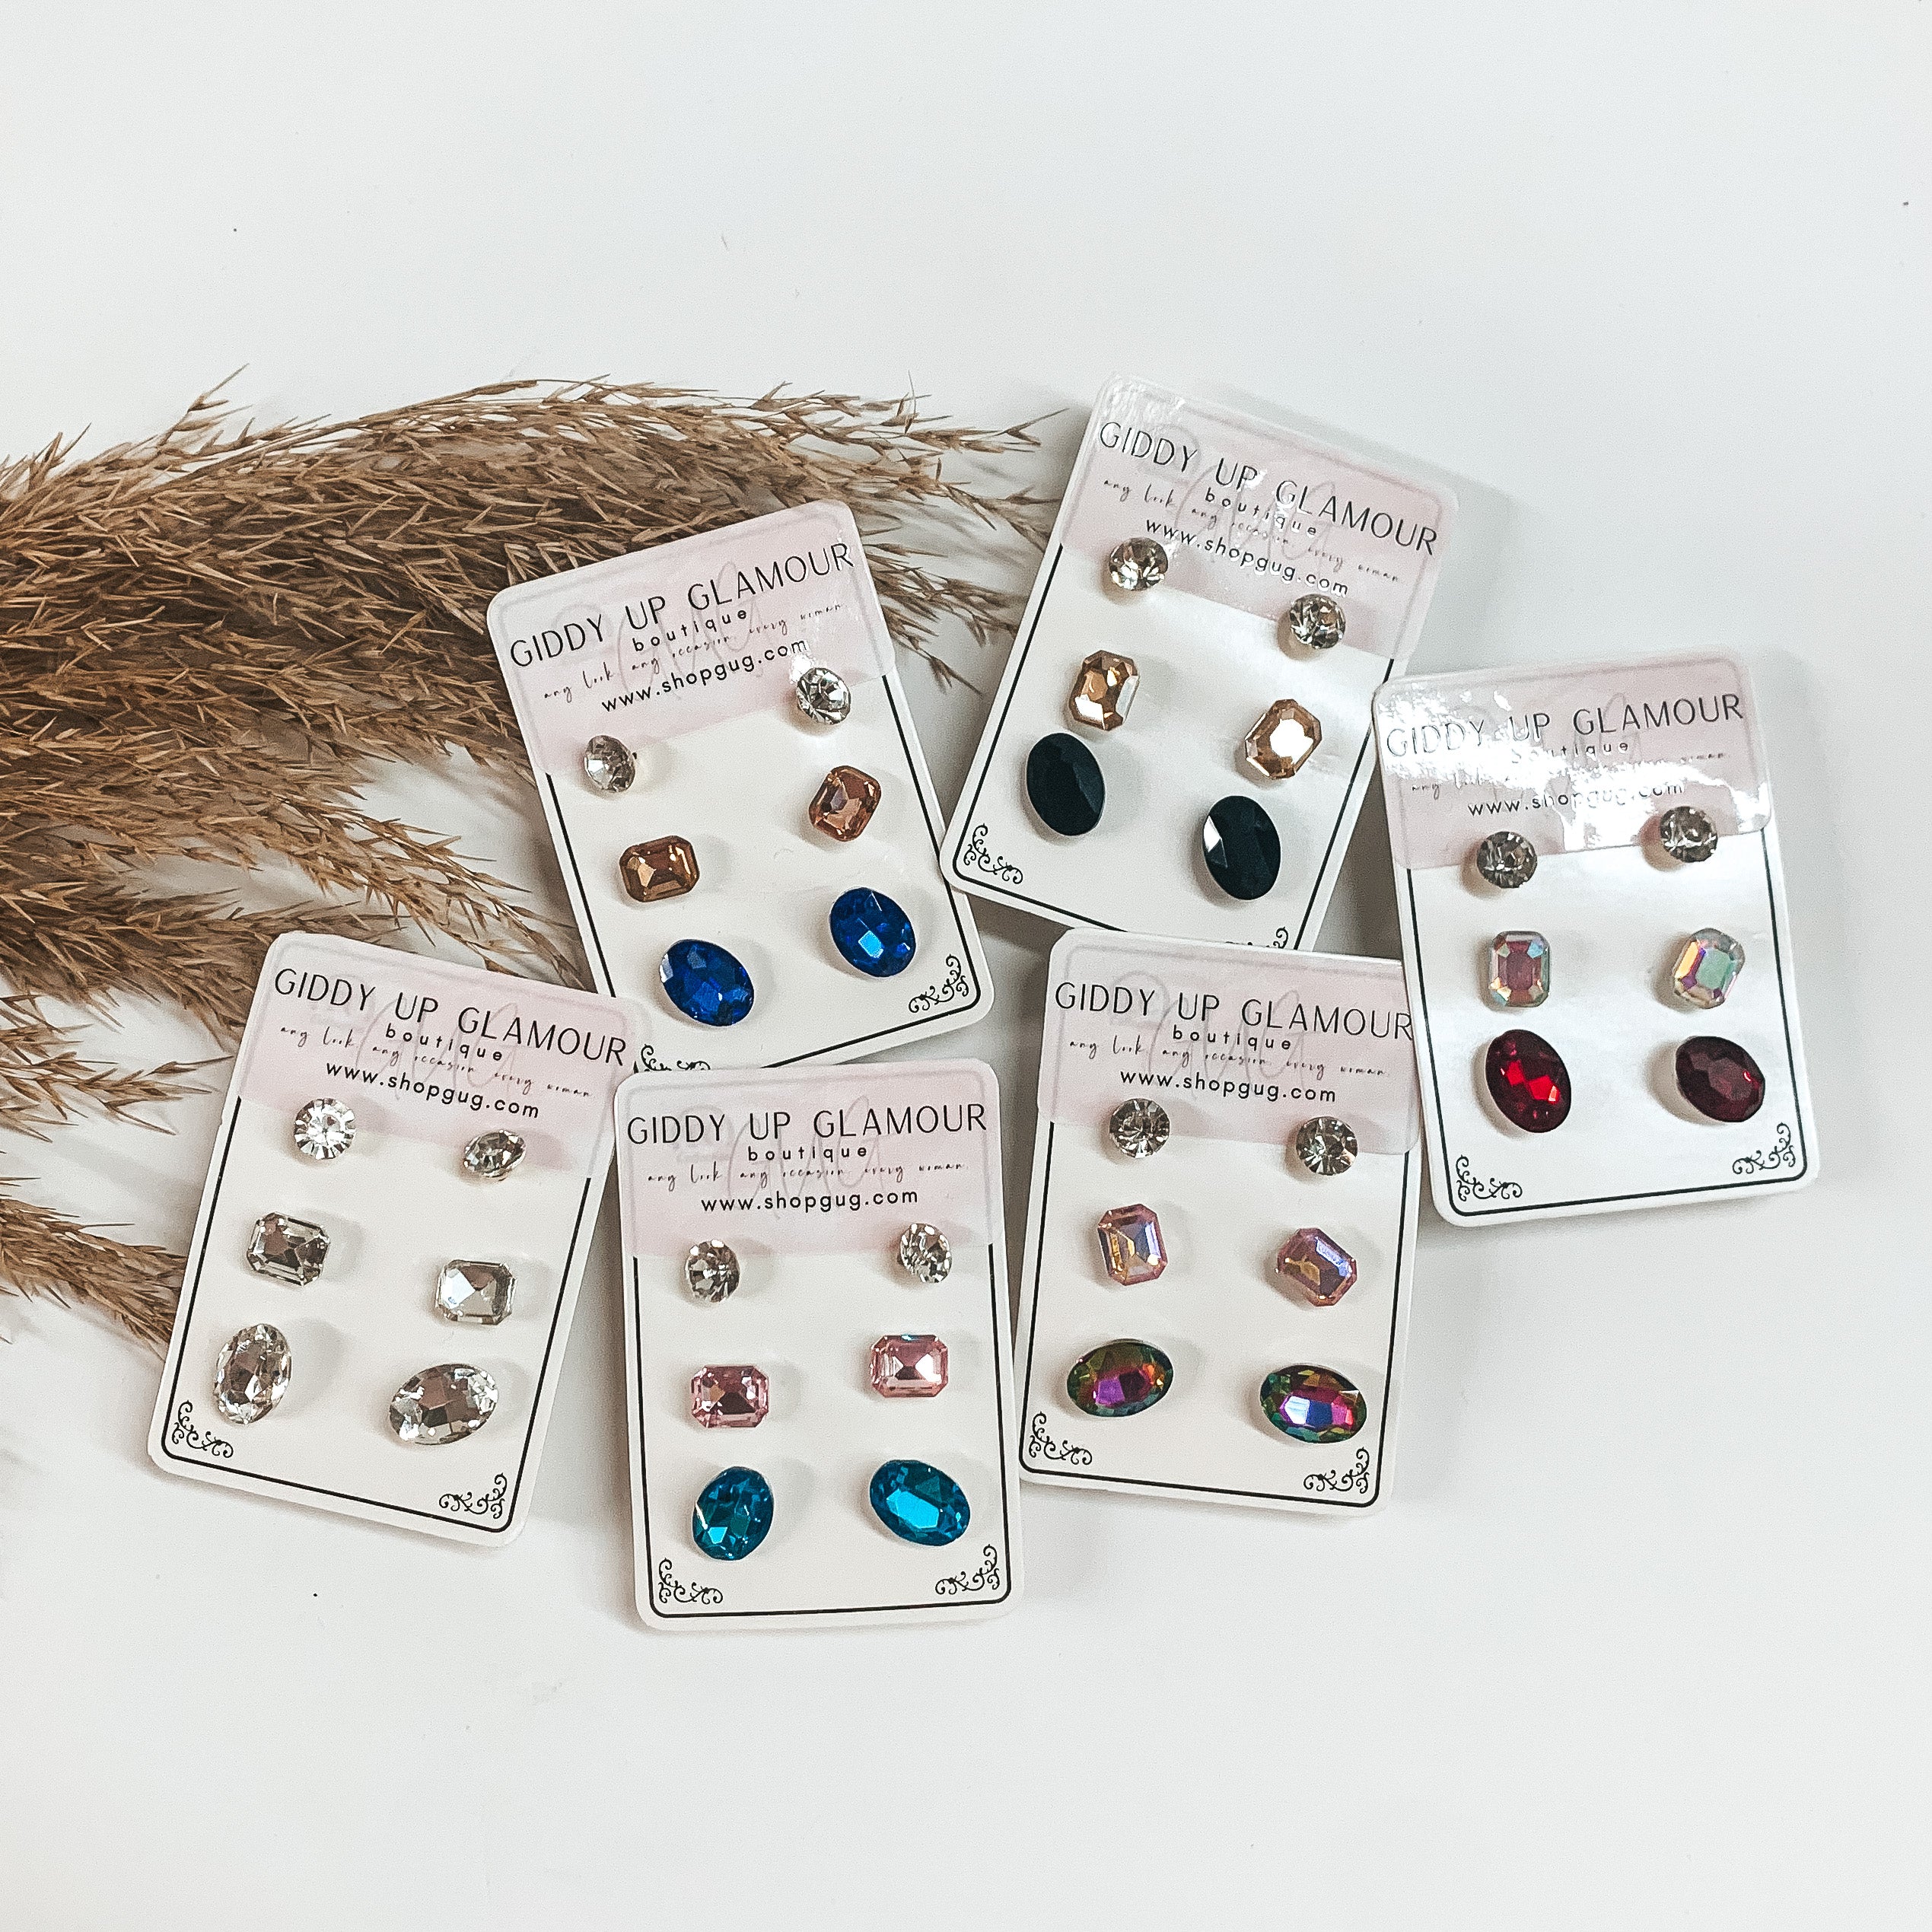 Pictured are six sets of earring sets. These earrings are pictured on a white background with tan pompous grass. 